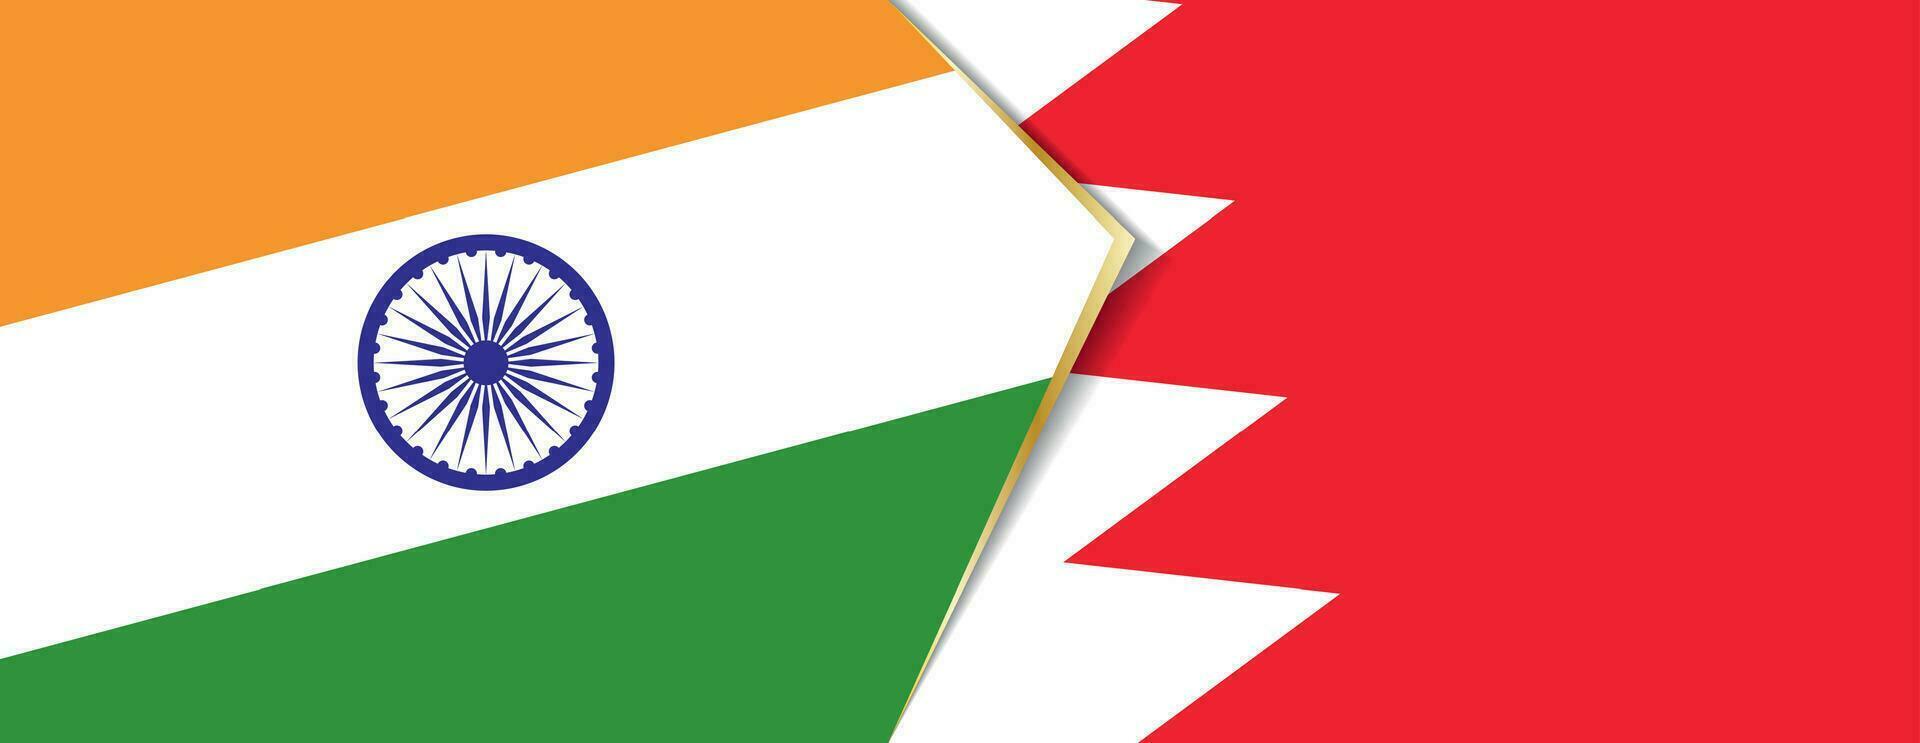 India and Bahrain flags, two vector flags.